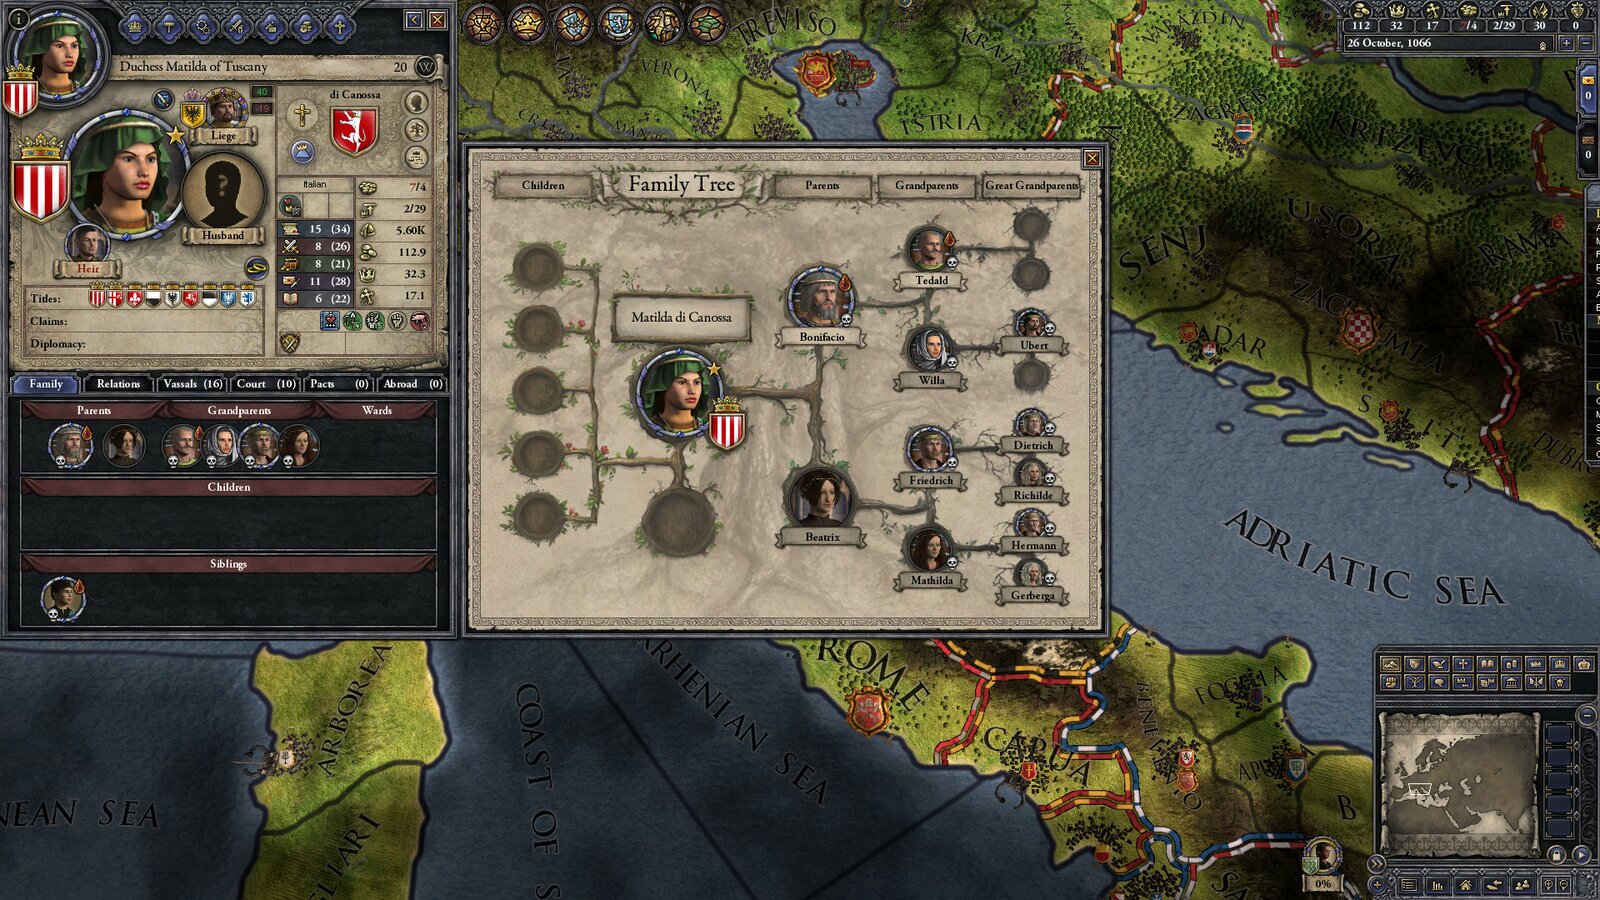 Crusader Kings II: The Way of Life - Collection